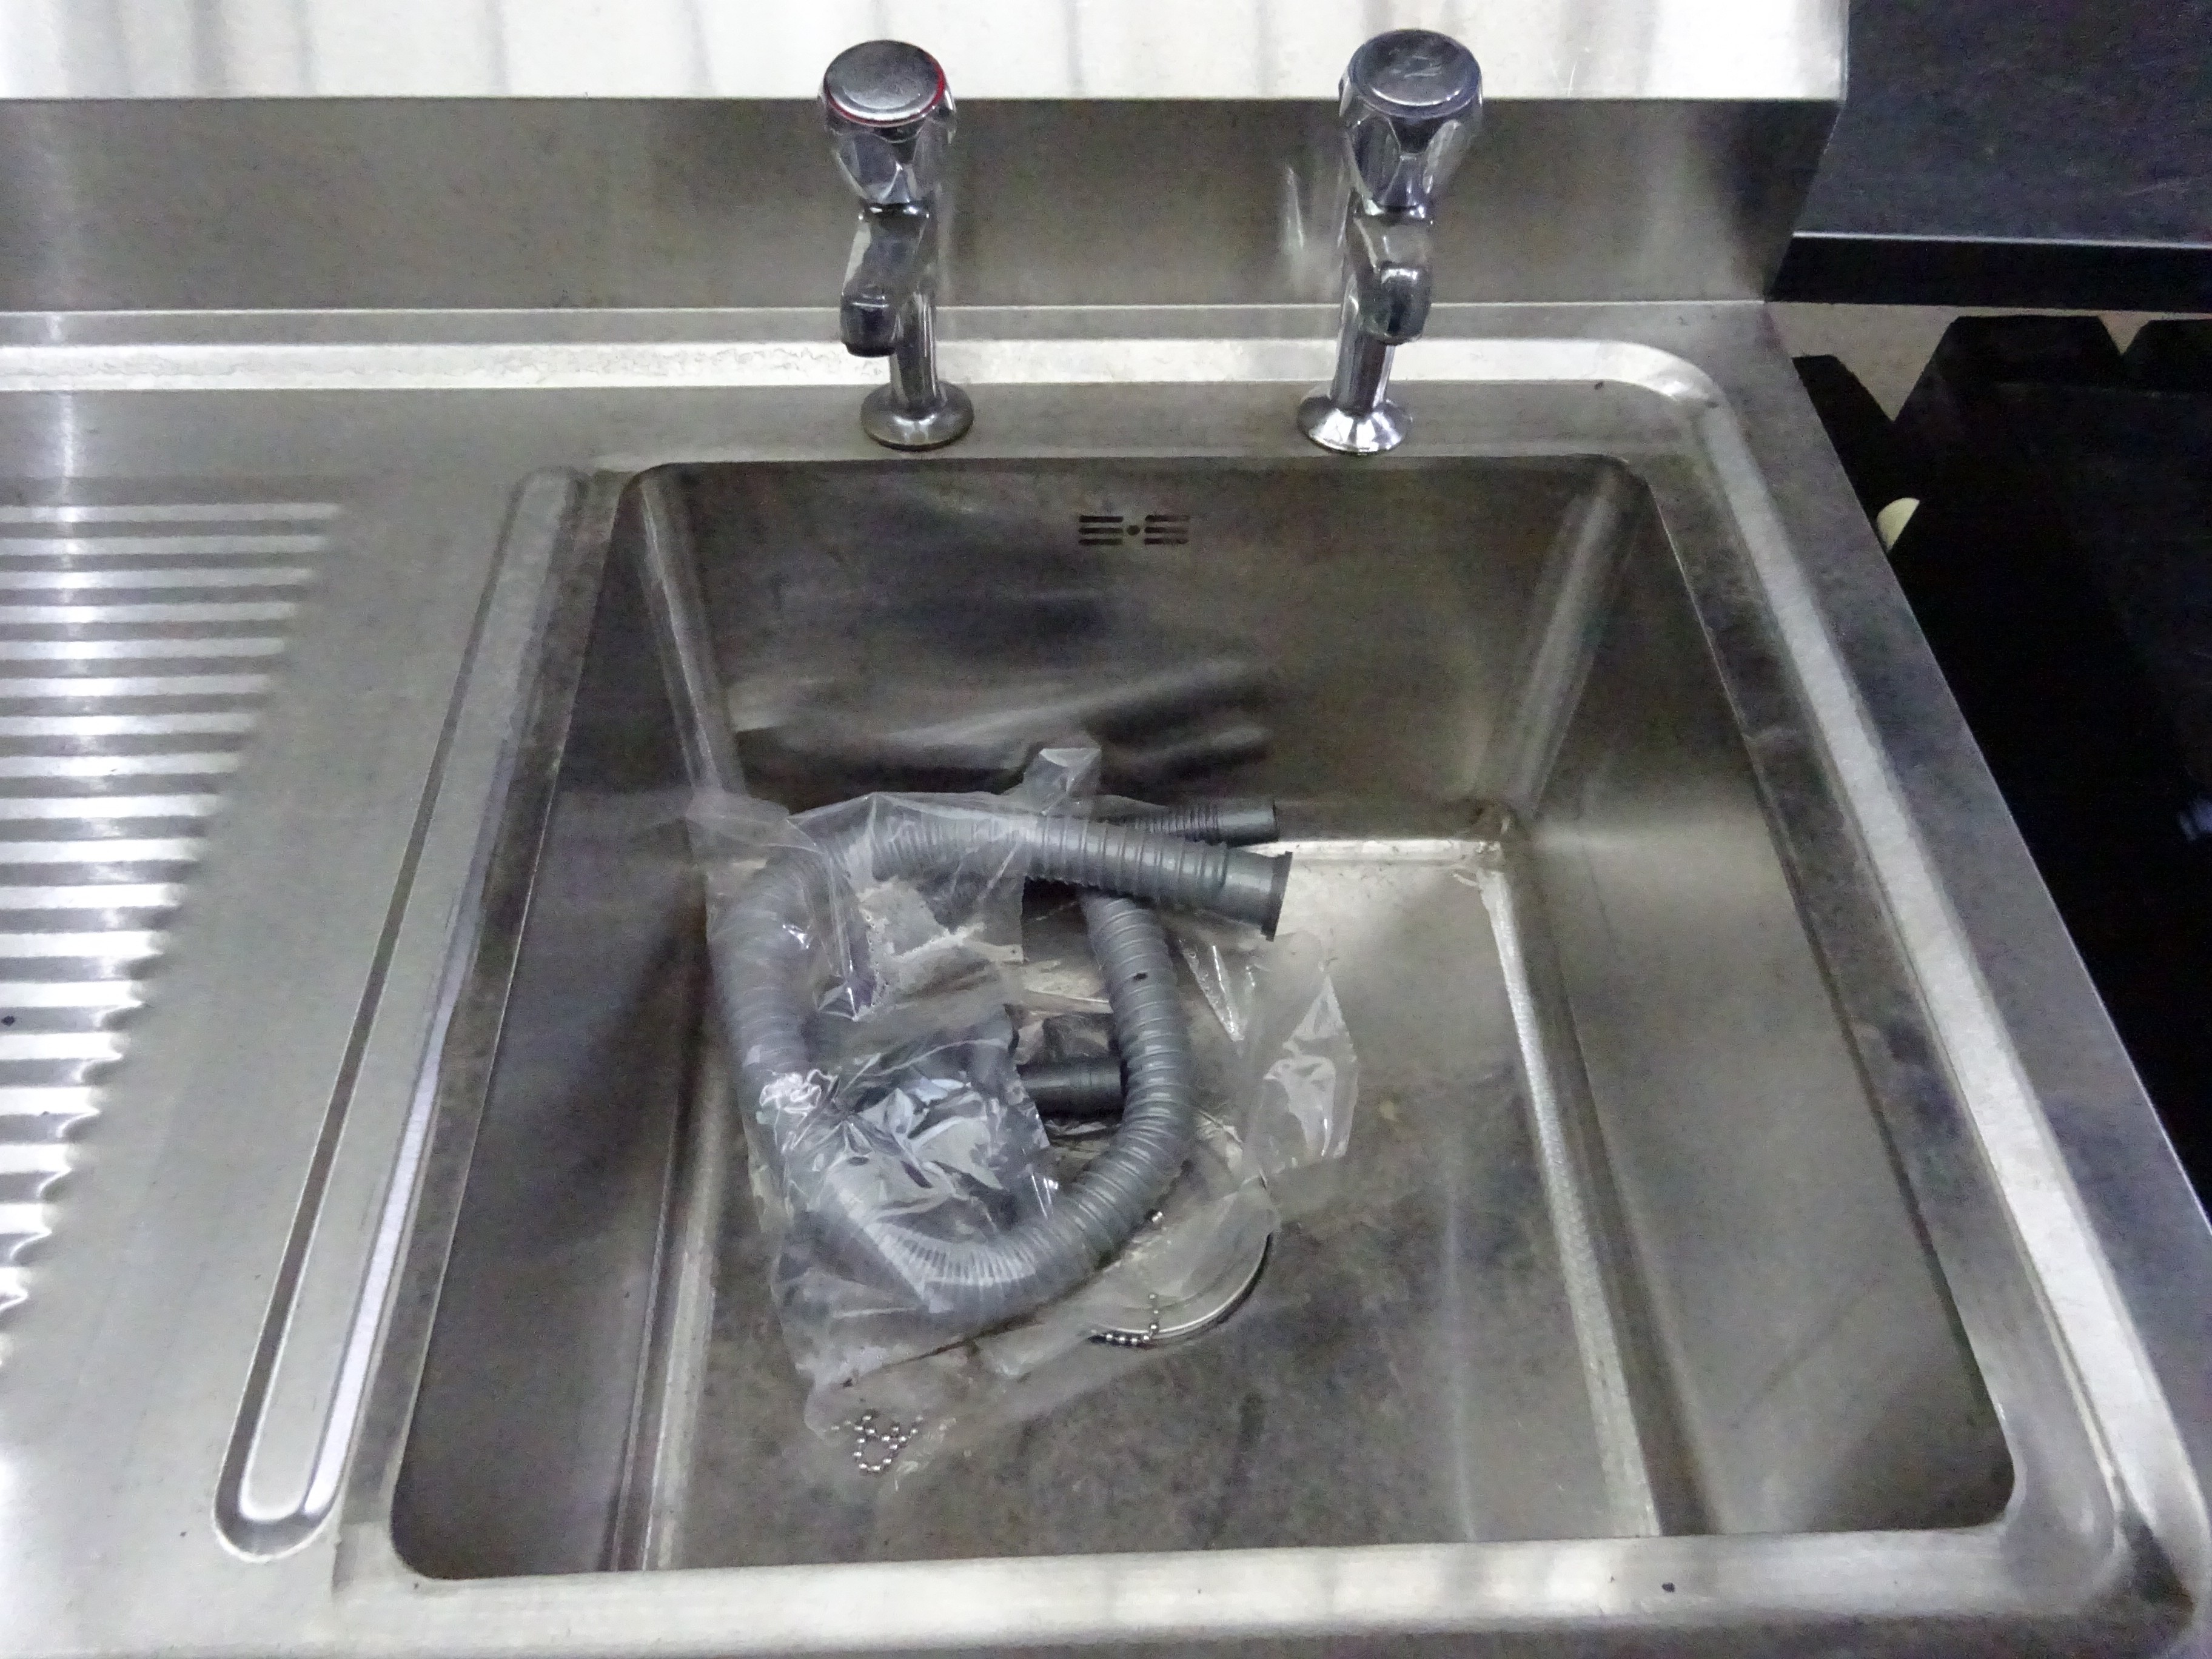 New Diaminox single bowl, single drainer sink with taps. - Image 2 of 2